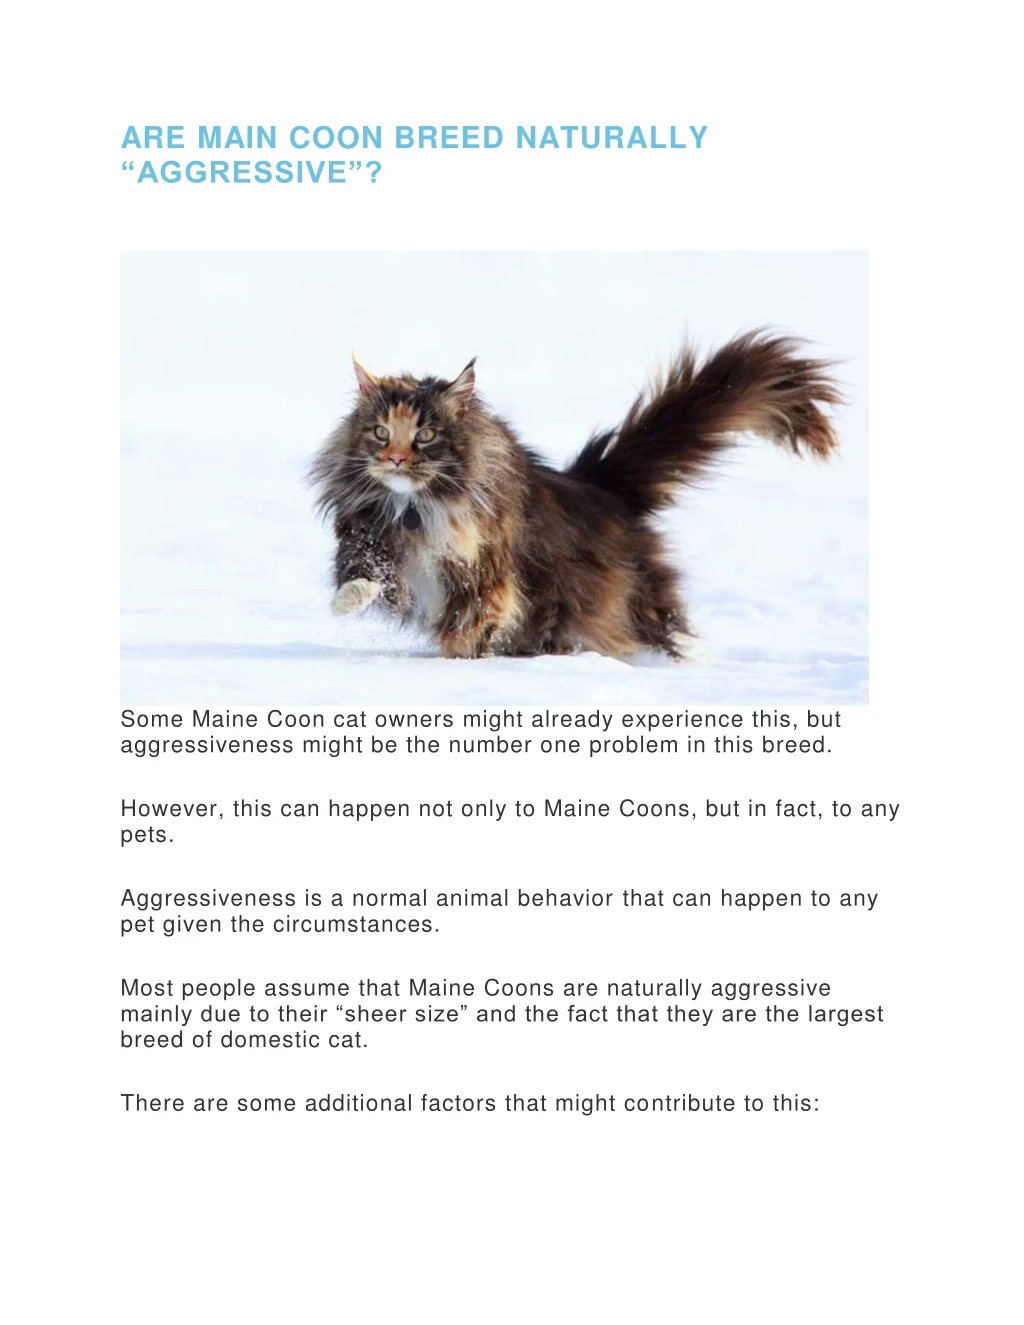 are main coon breed naturally aggressive